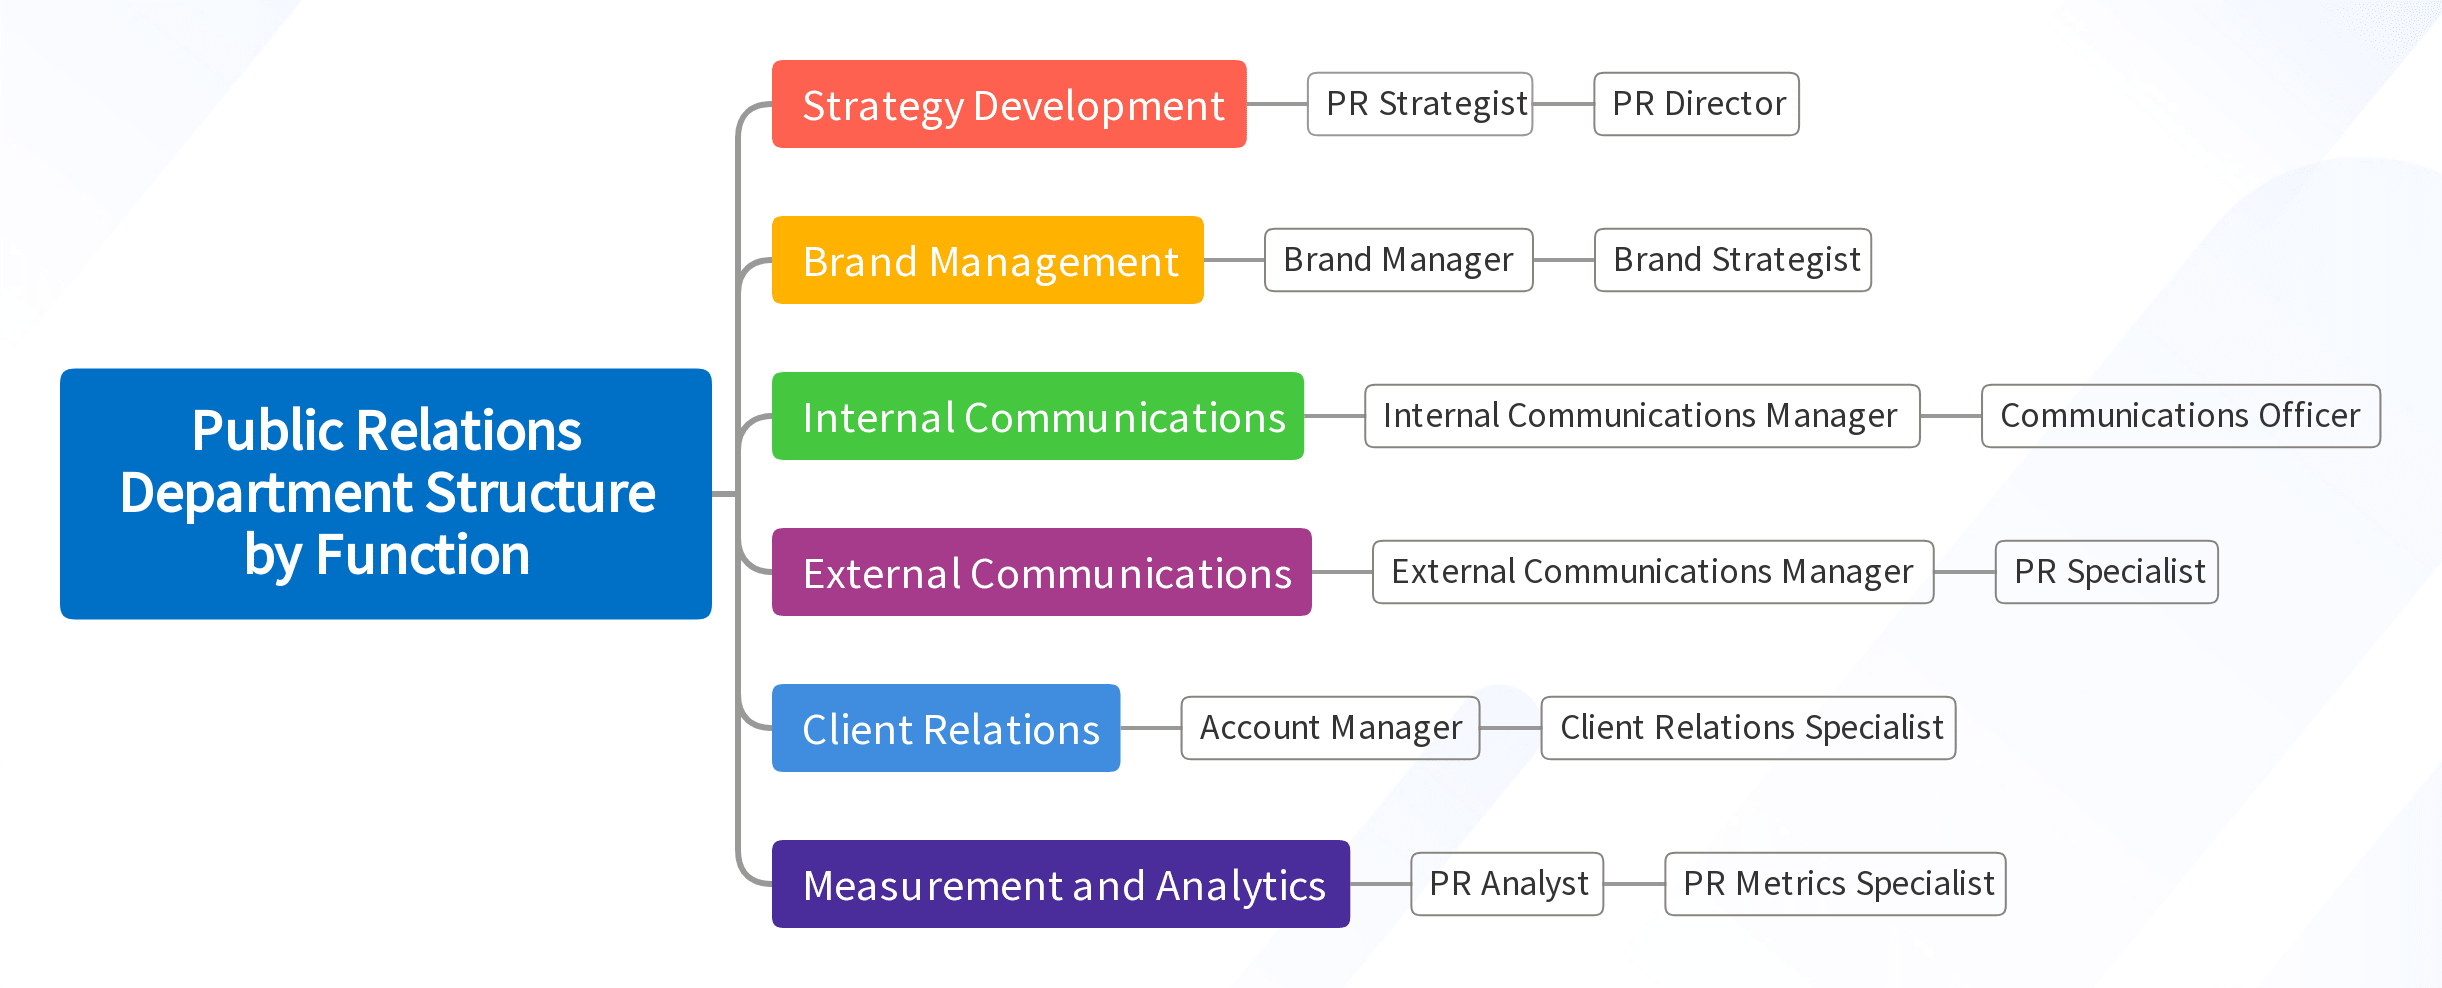 Public Relations Department Structure by Function